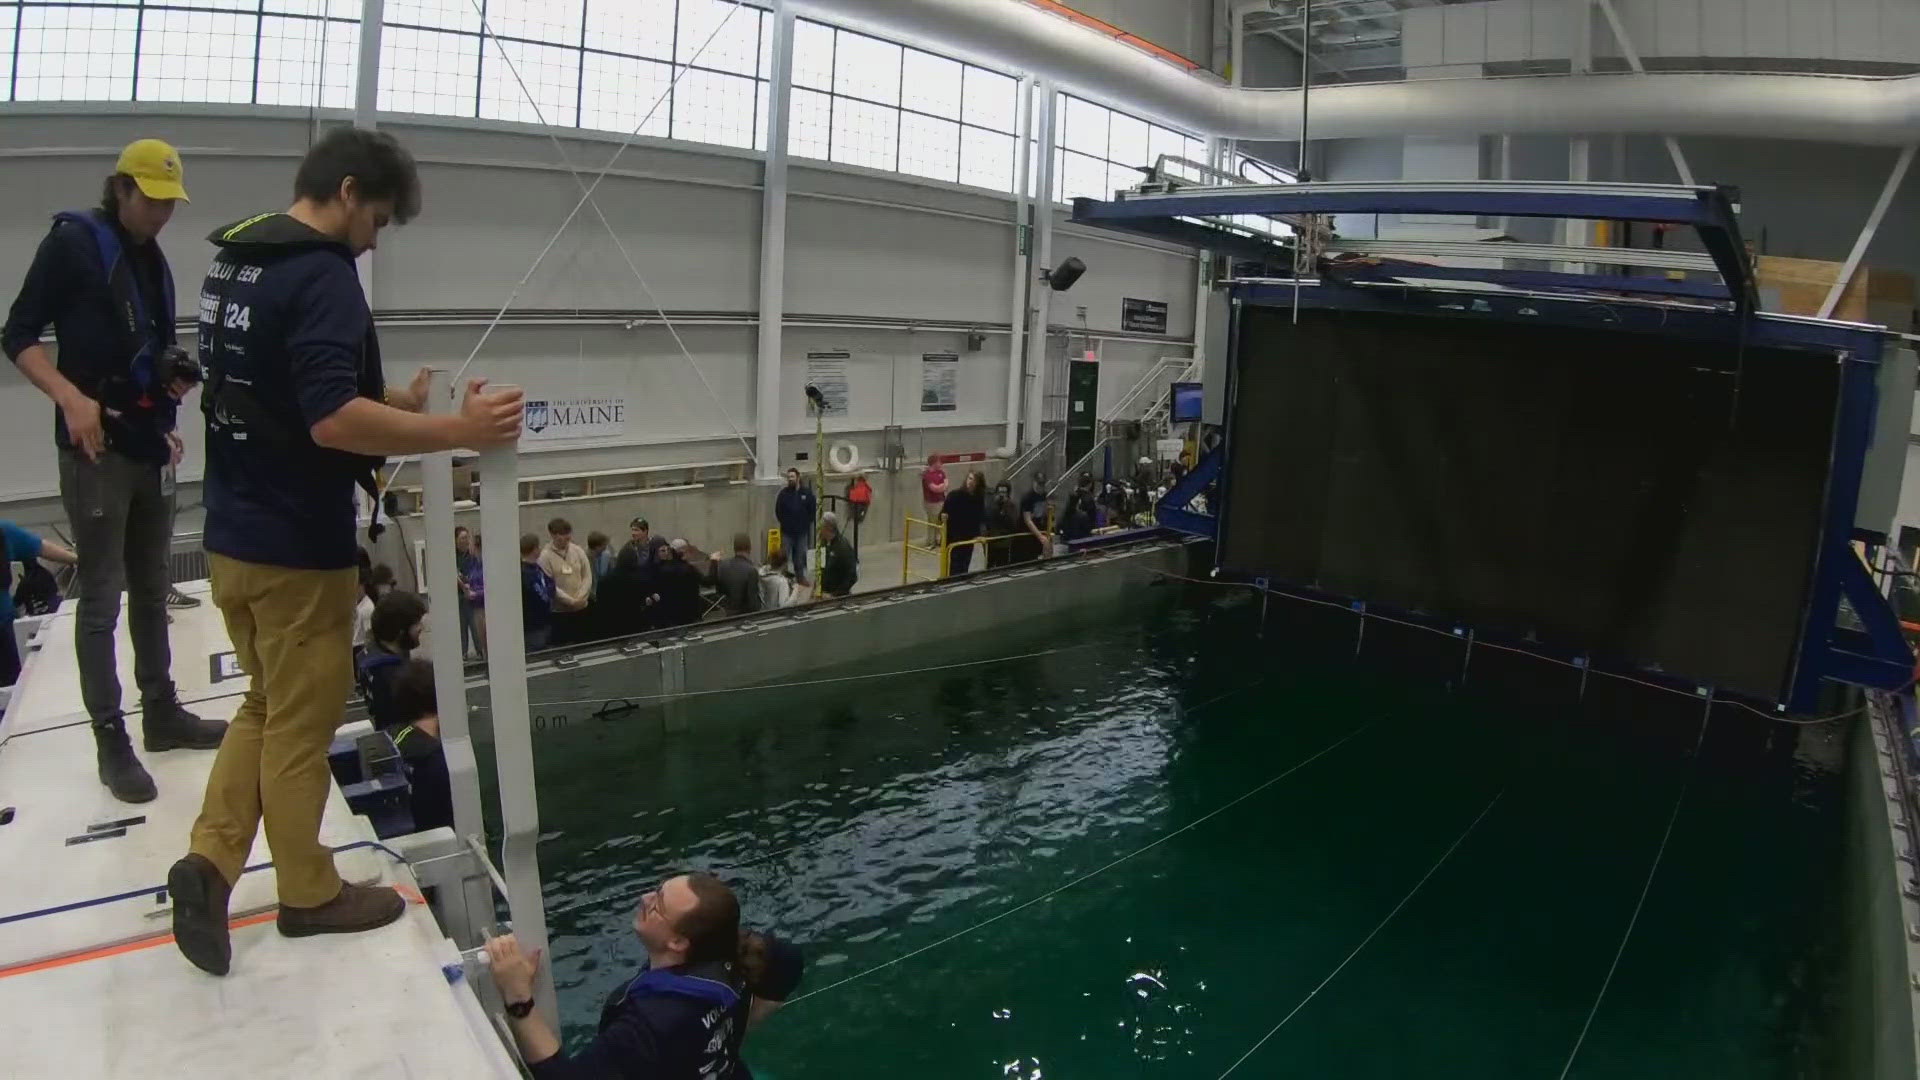 One hundred teams created floating platforms for model wind turbines and put them to the test against wind and water.